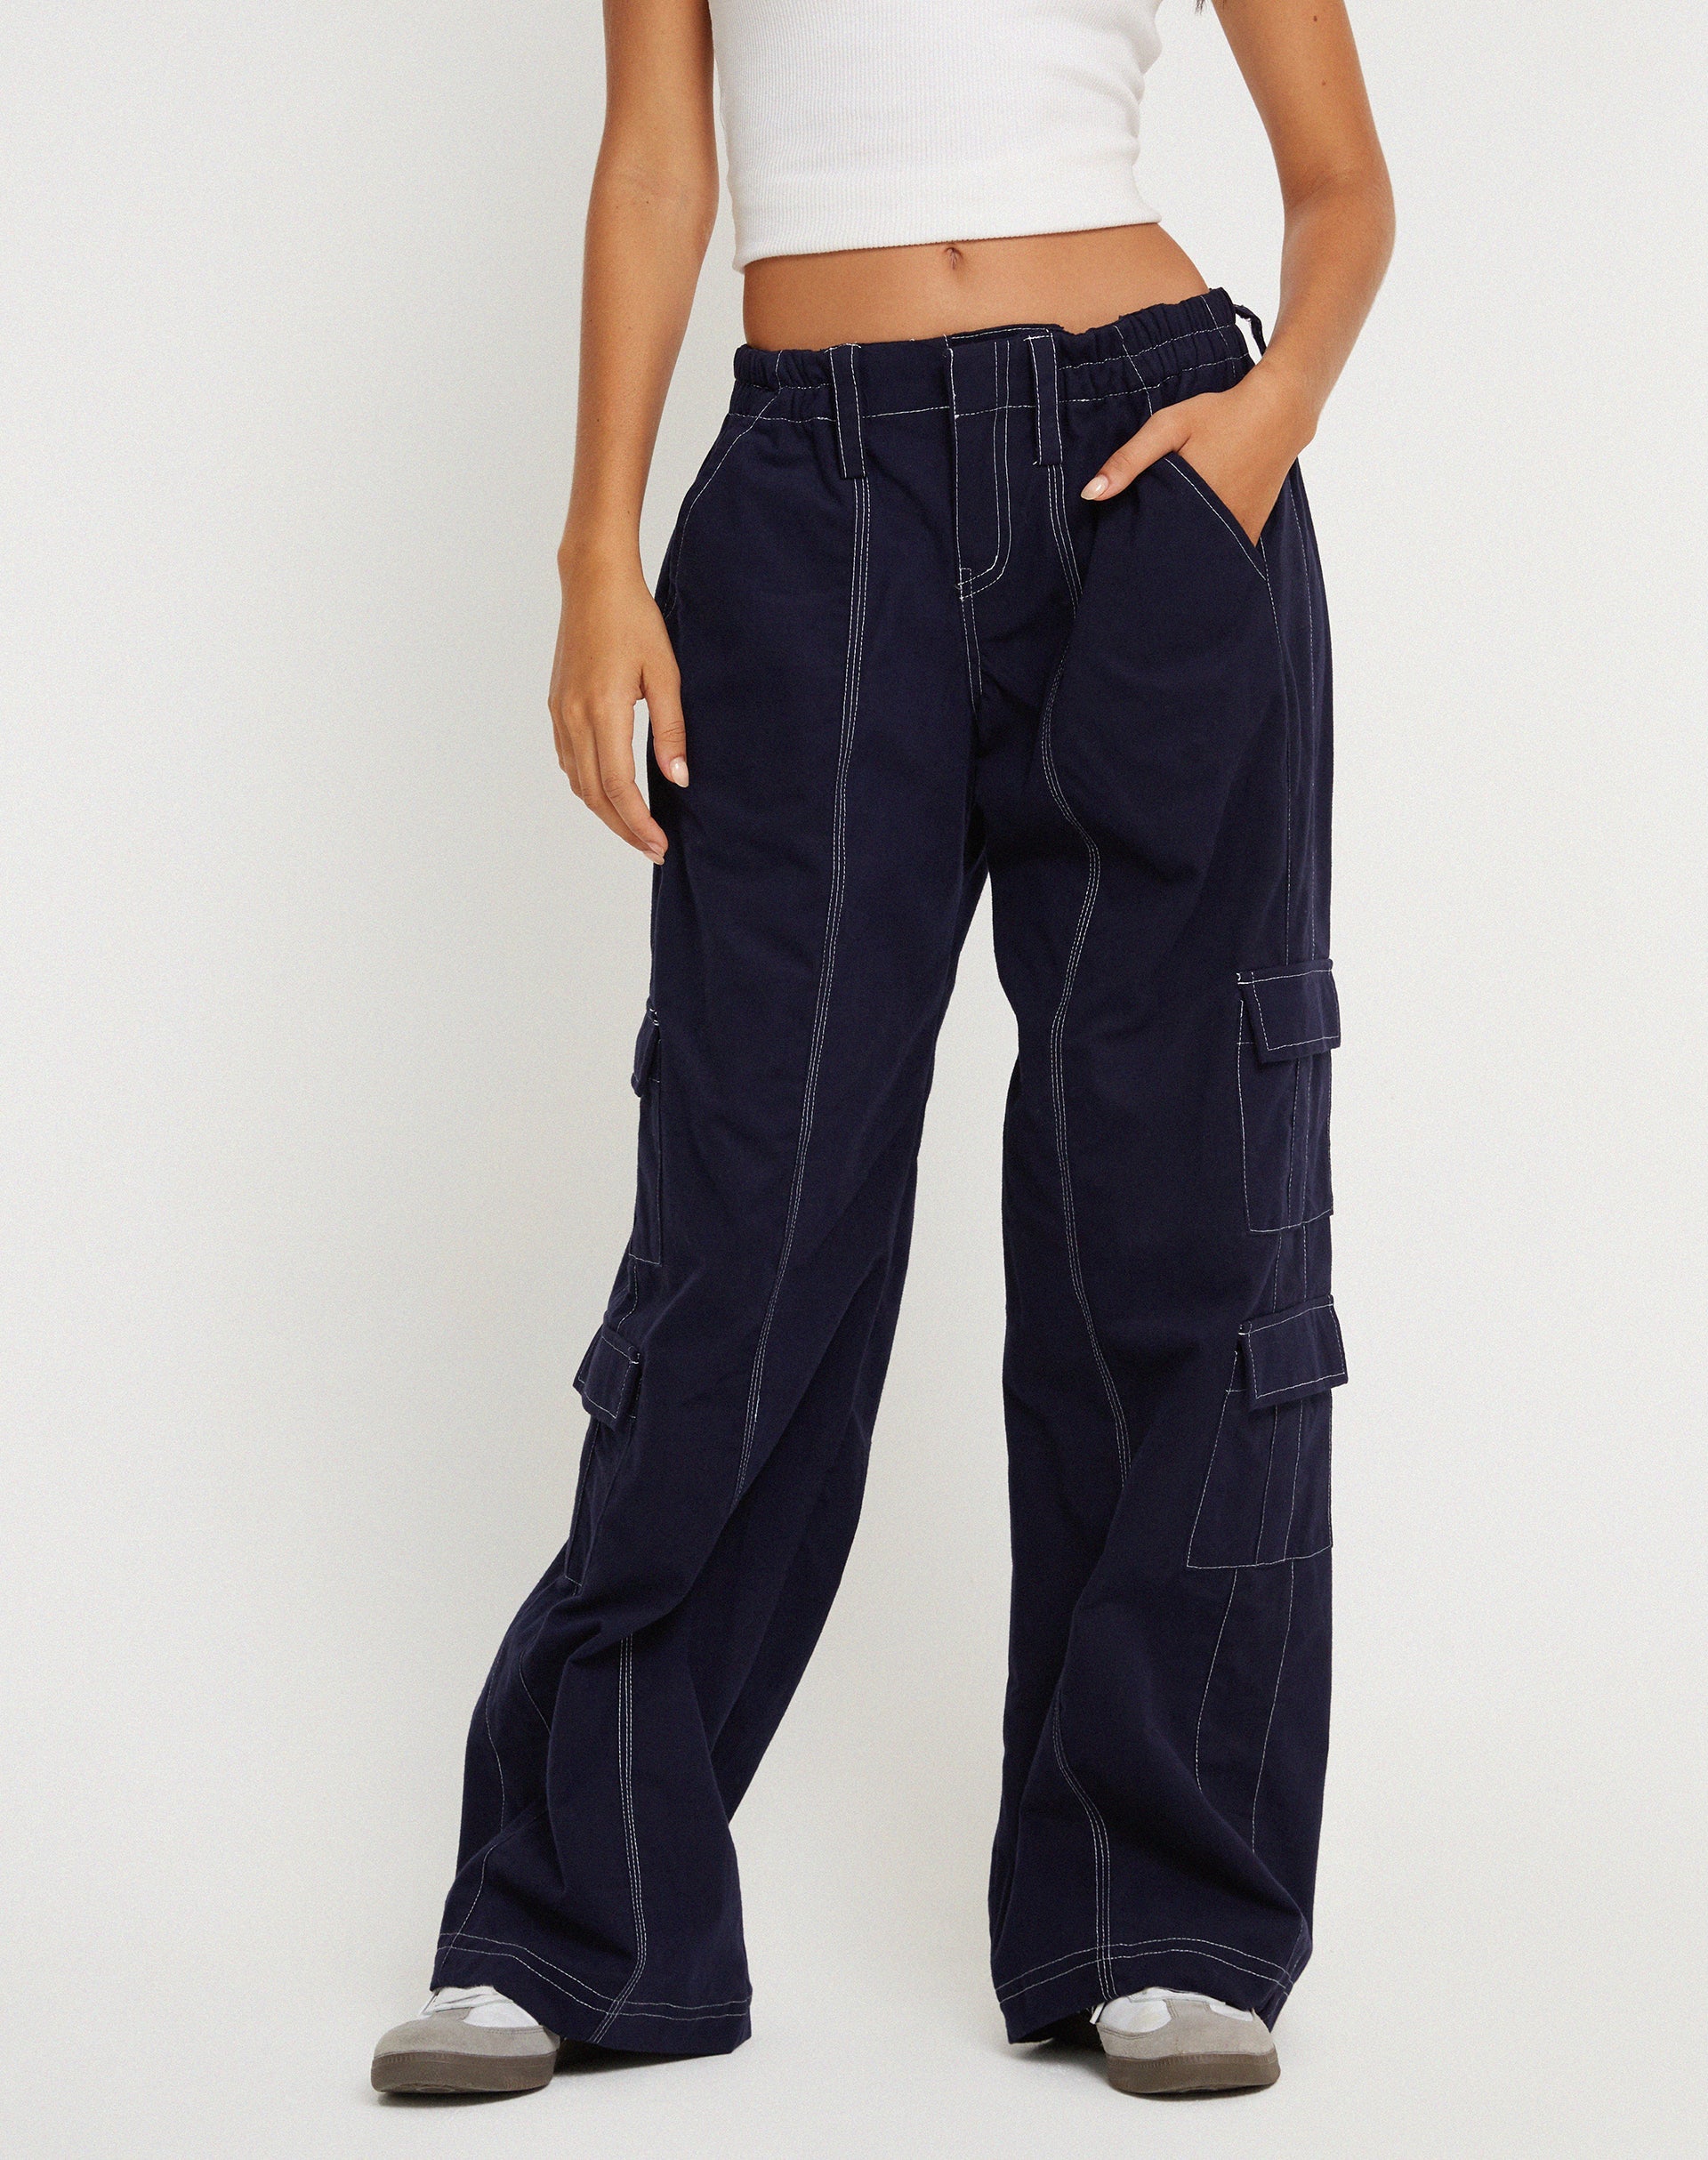 image of Hansa Trouser in Navy with Top White Stitch